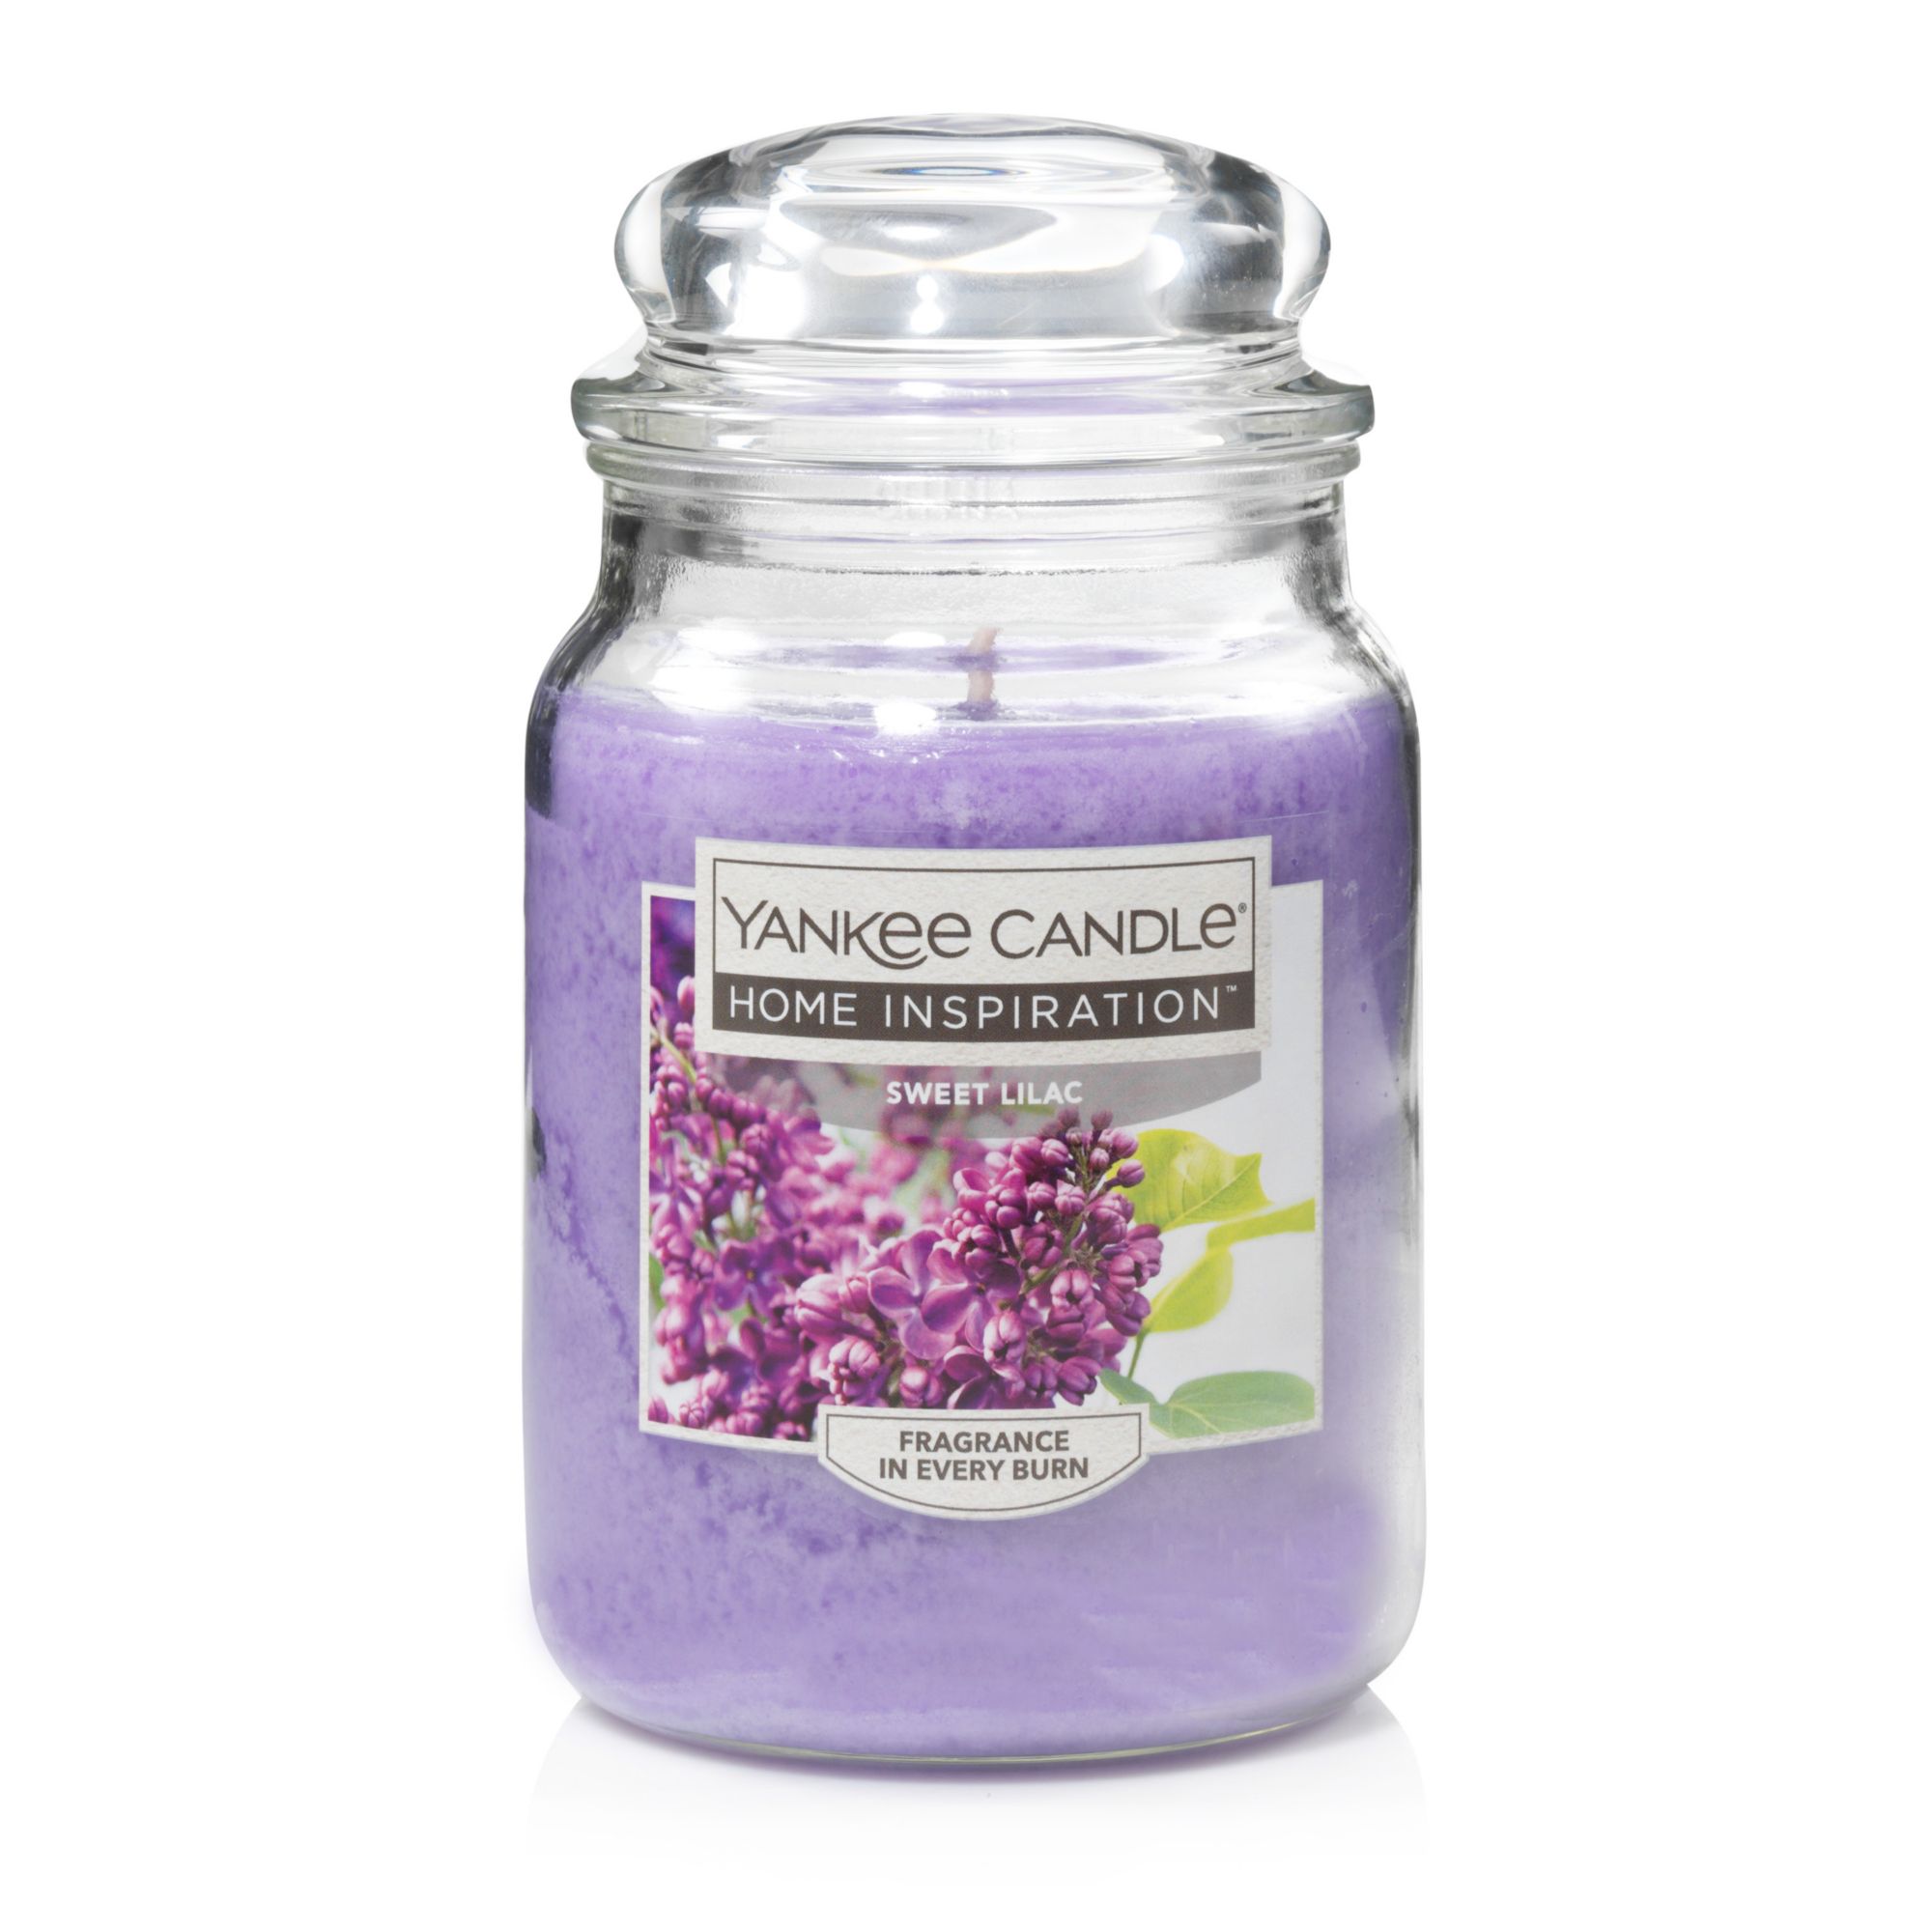 Yankee Candle Jar Candle, 19 oz. - Sweet Lilac | BJ's Wholesale Club